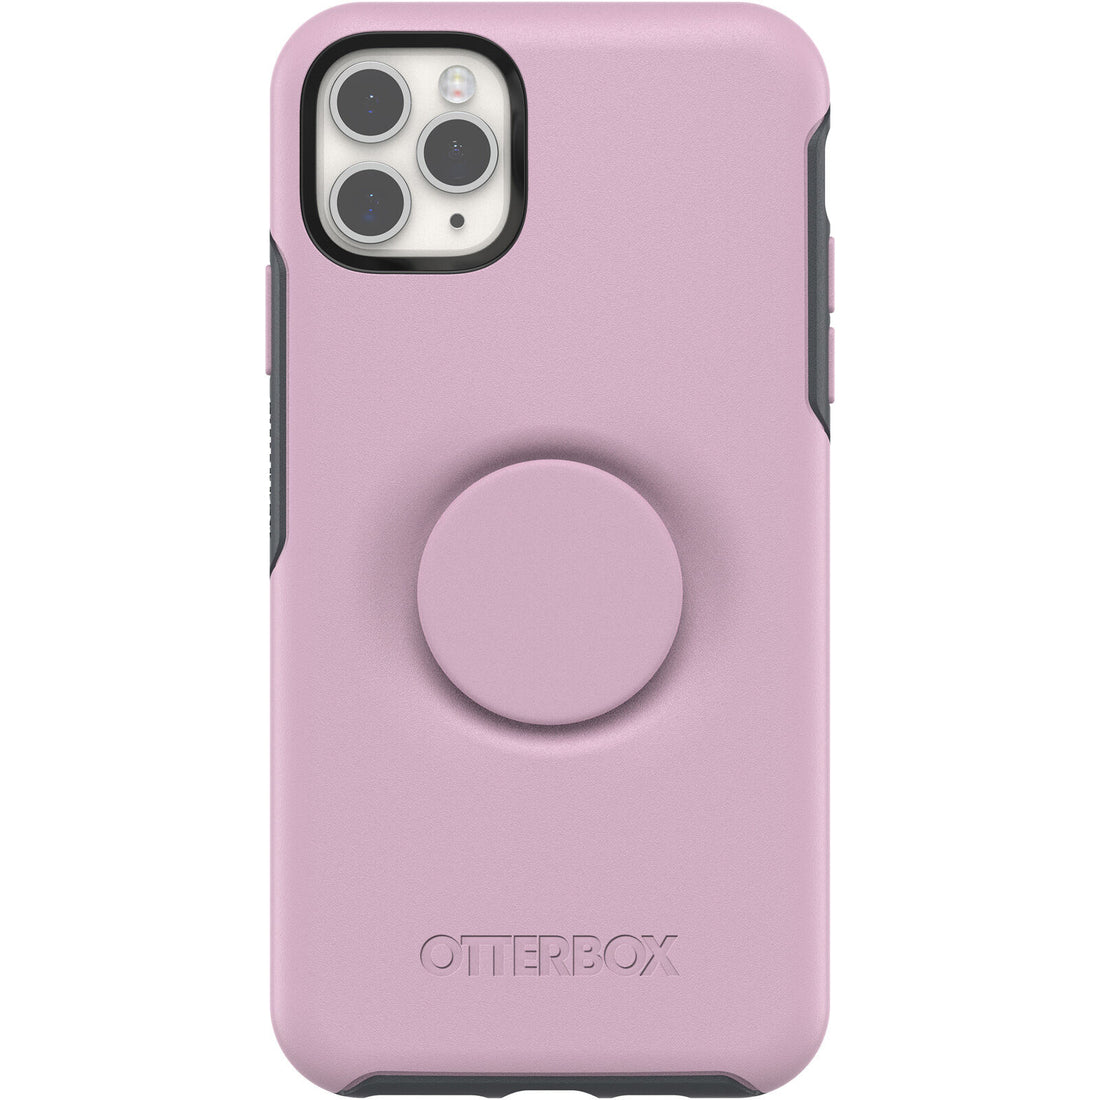 OtterBox + POP Case for Apple iPhone 11 Pro Max - Pink (New)